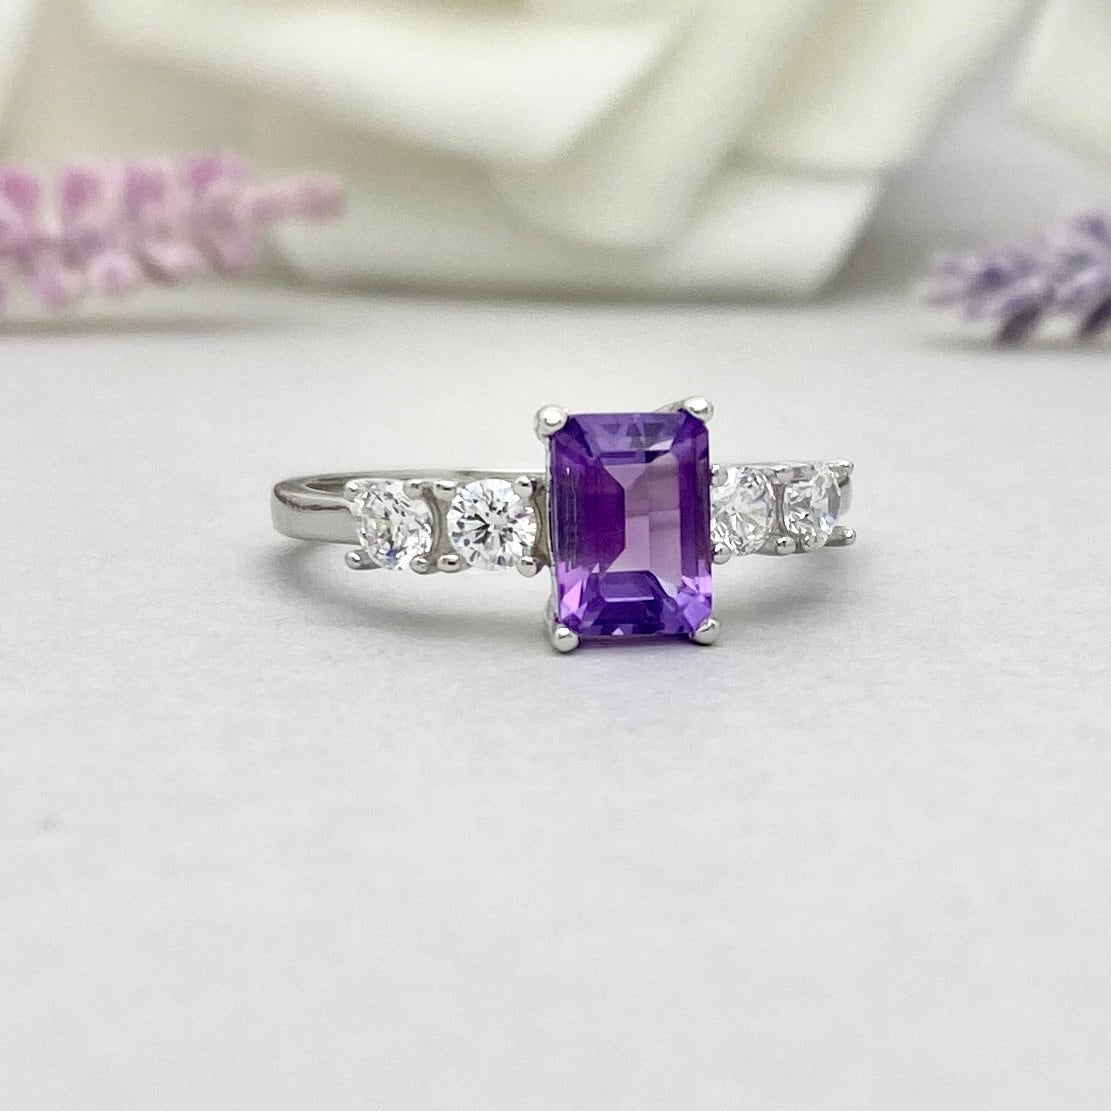 2.00Ctw Emerald Cut Amethyst Women's Dainty Wedding Engagement Ring Birthstone Gift Ring 925 Sterling silver Approx Weight 1.42gm's